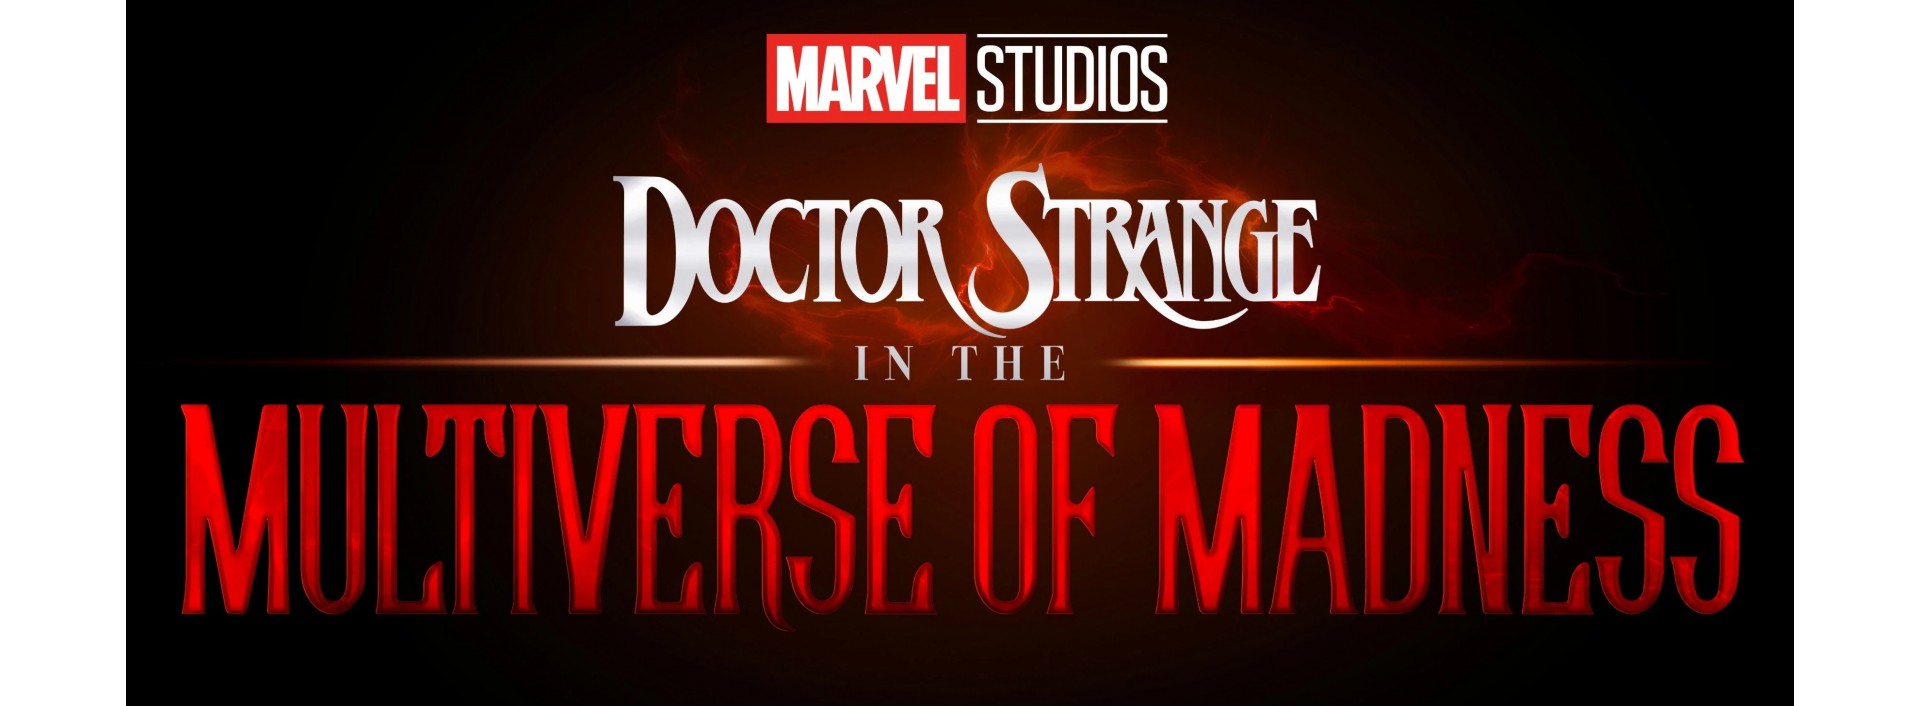 DOCTOR STRANGER IN THE MULTIVERSE OF MADNESS